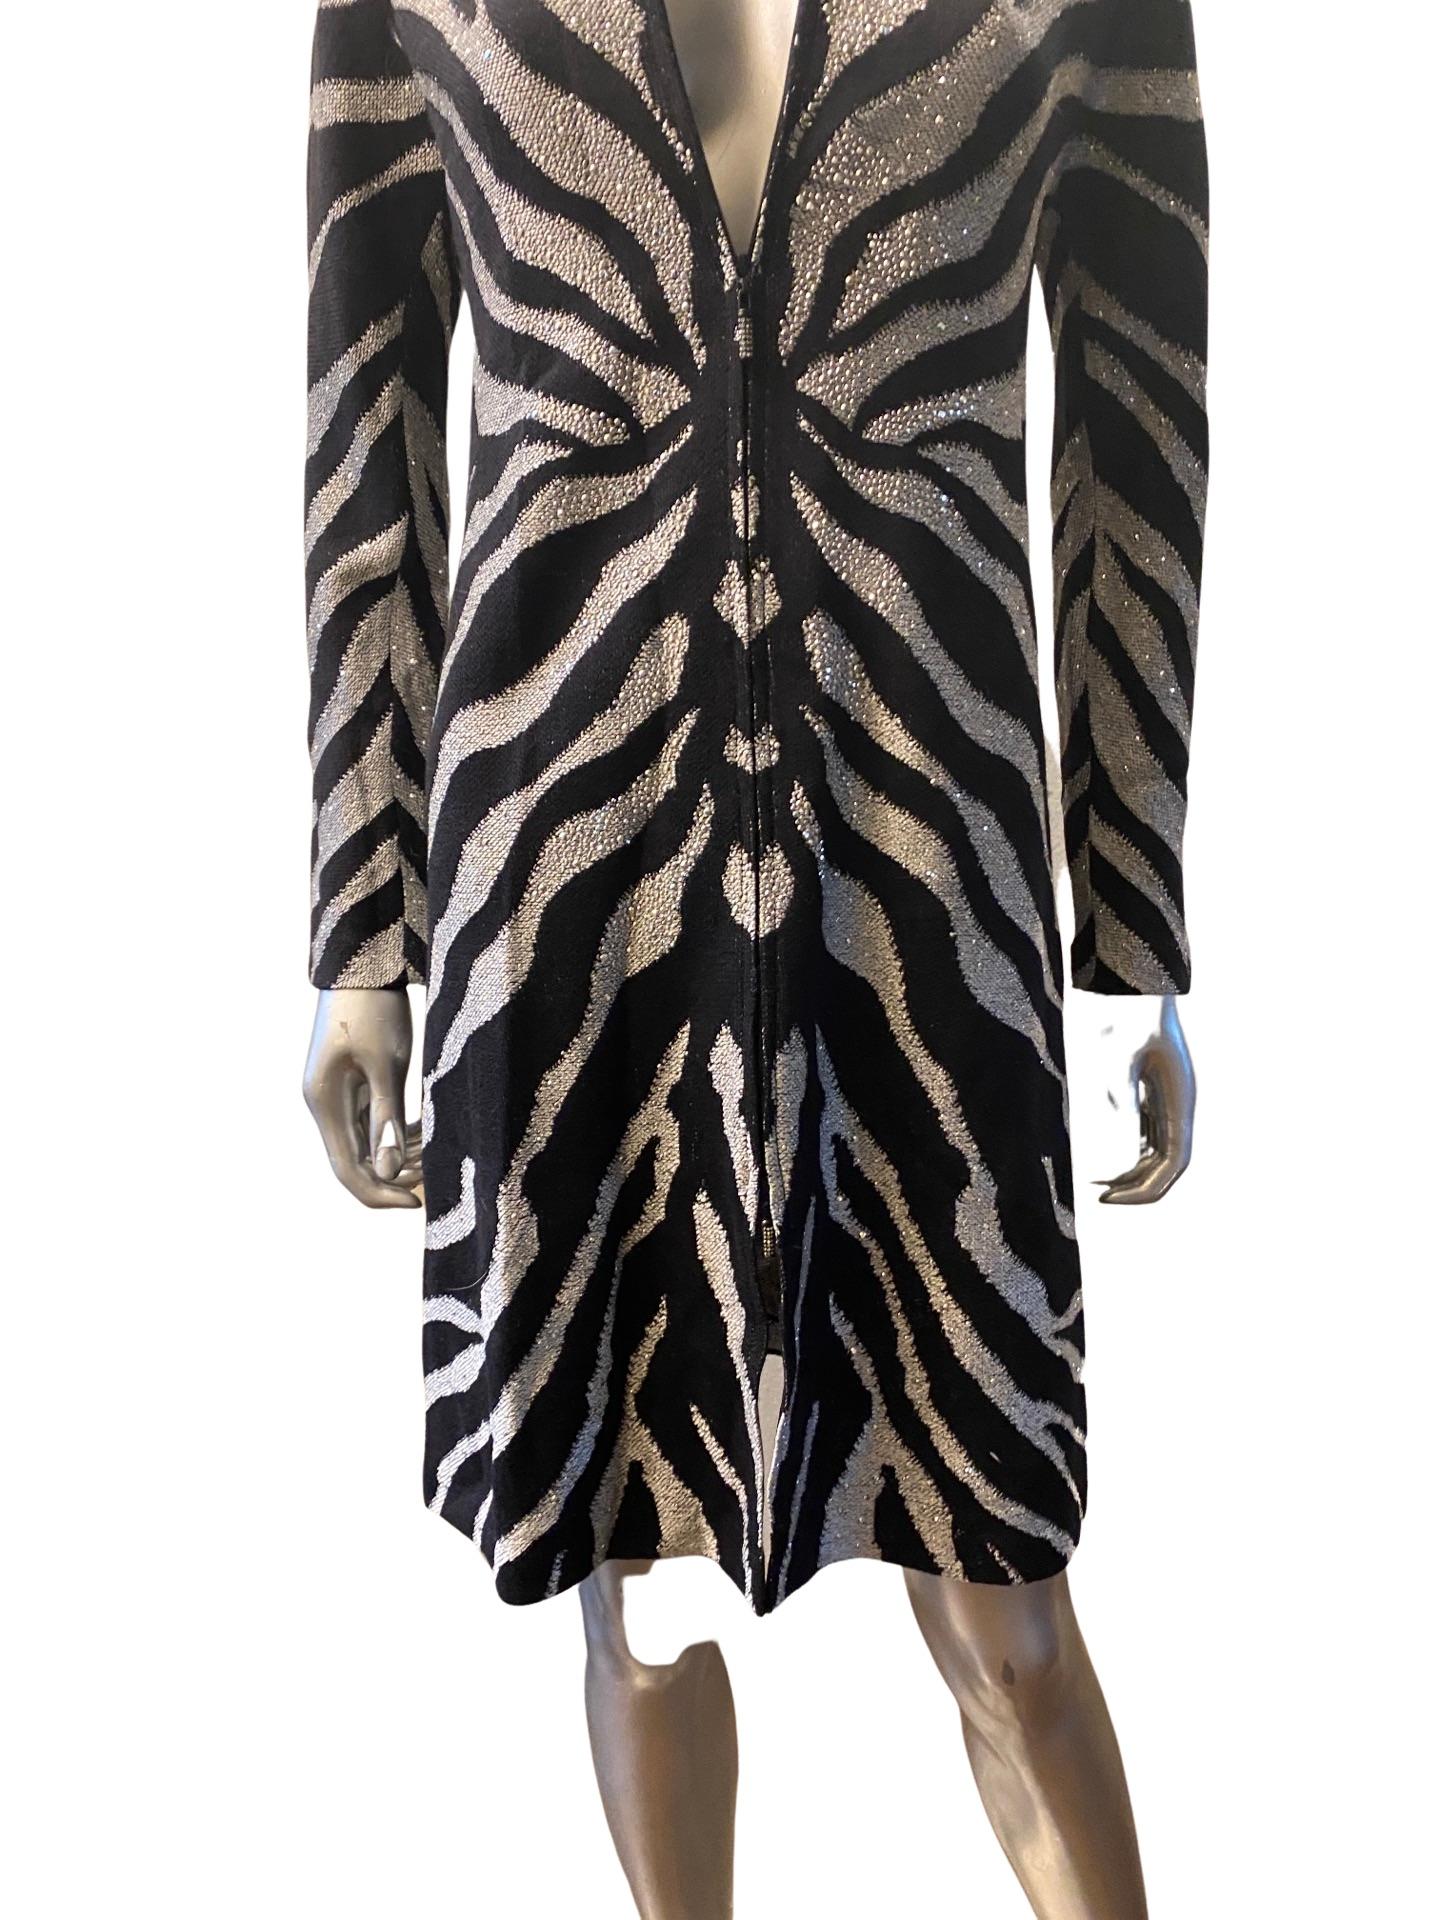 Black St John Evening Zebra Knit Zip Front Dress with Silver Beading Size 2 NWT For Sale